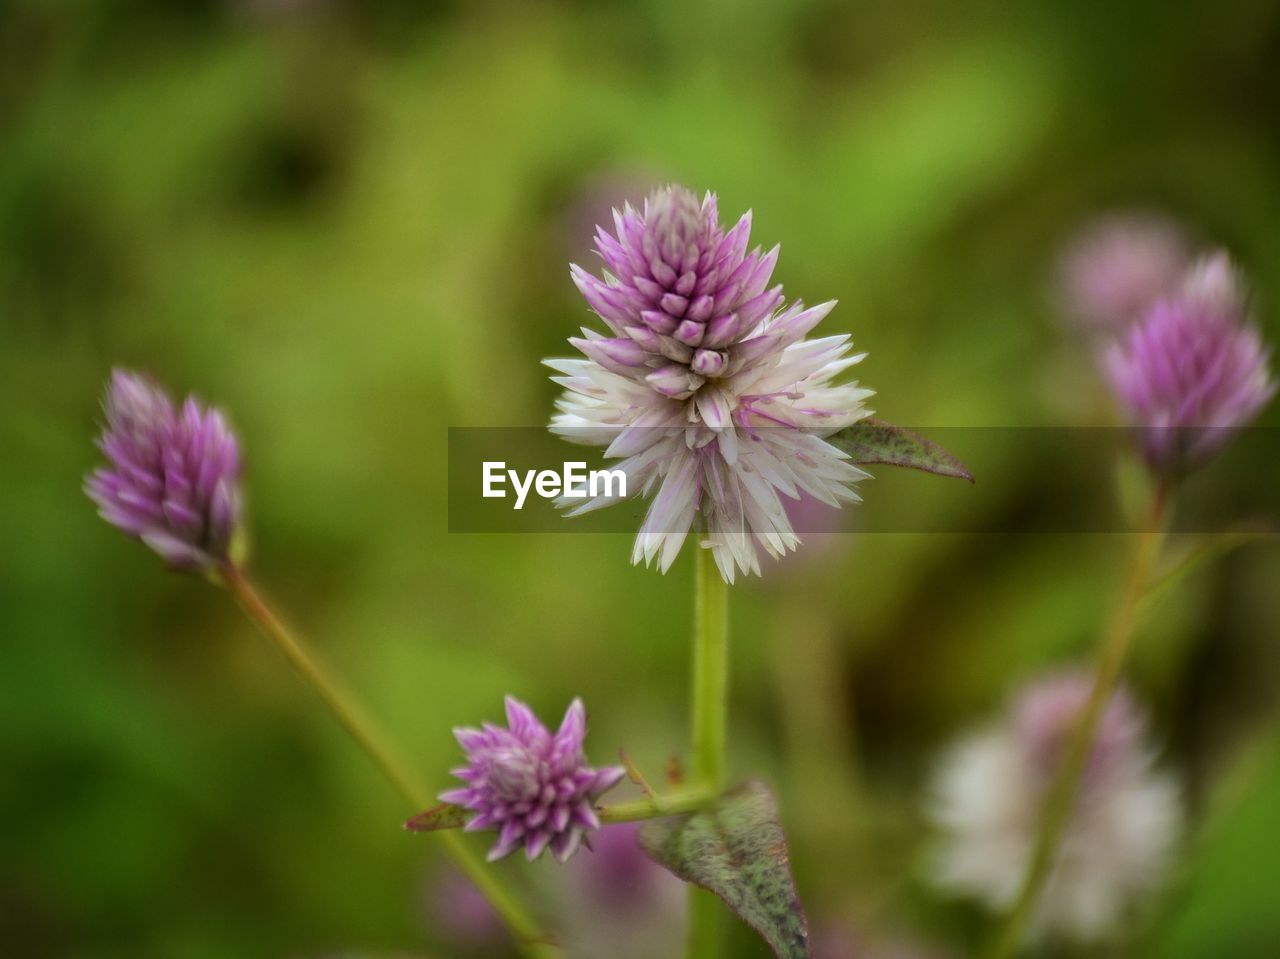 CLOSE-UP OF PURPLE THISTLE FLOWERS